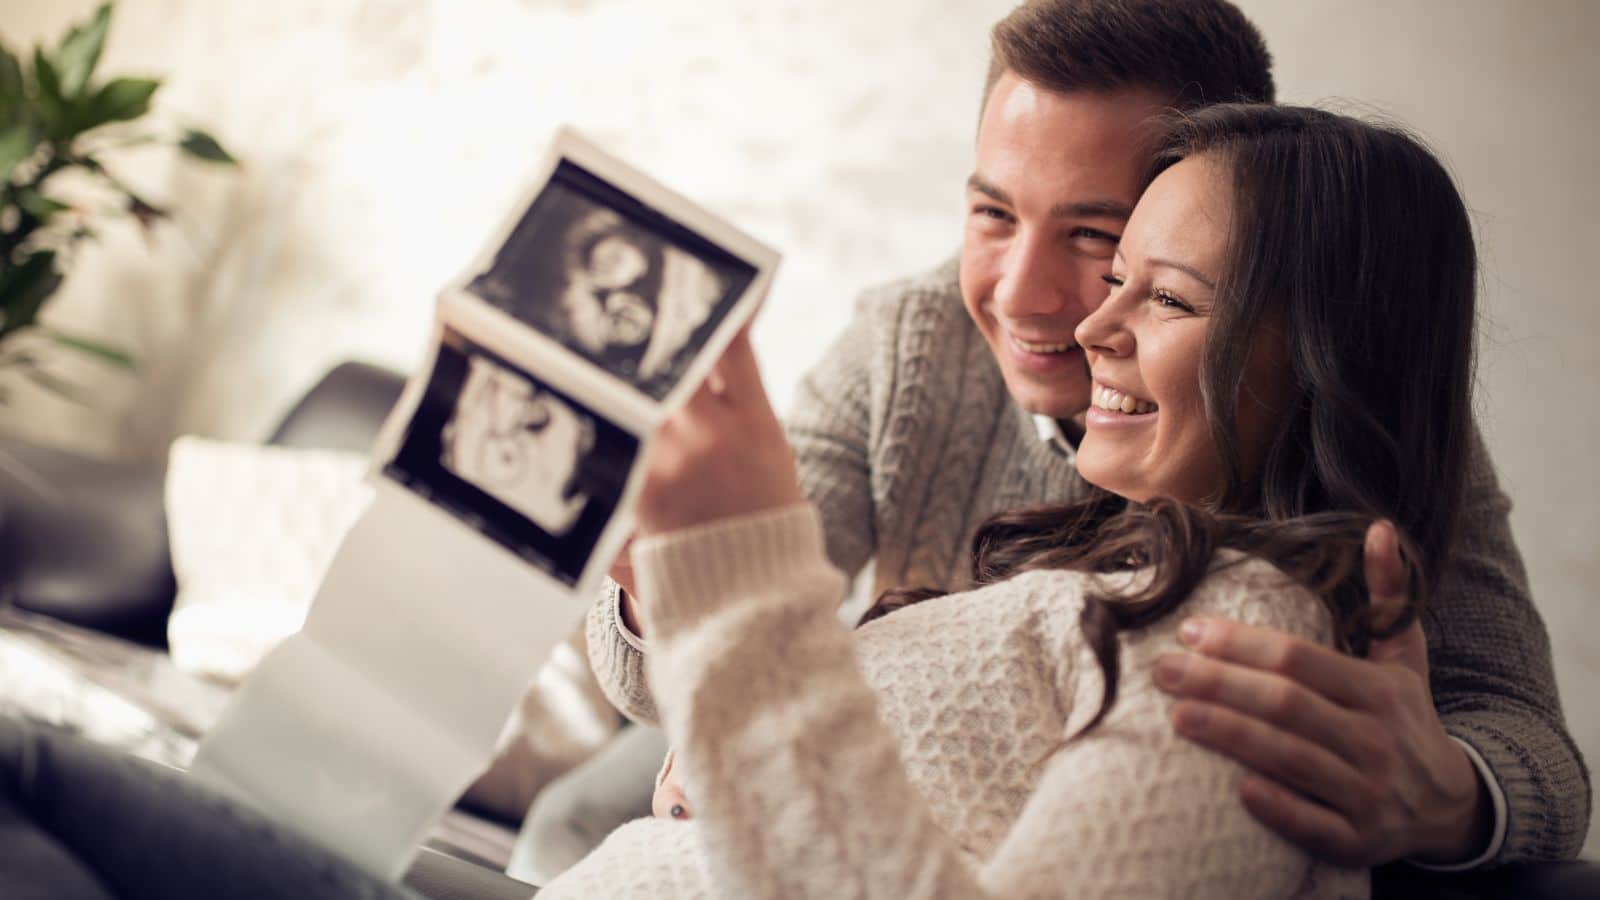 A married couple looking at sonogram pictures and smiling.